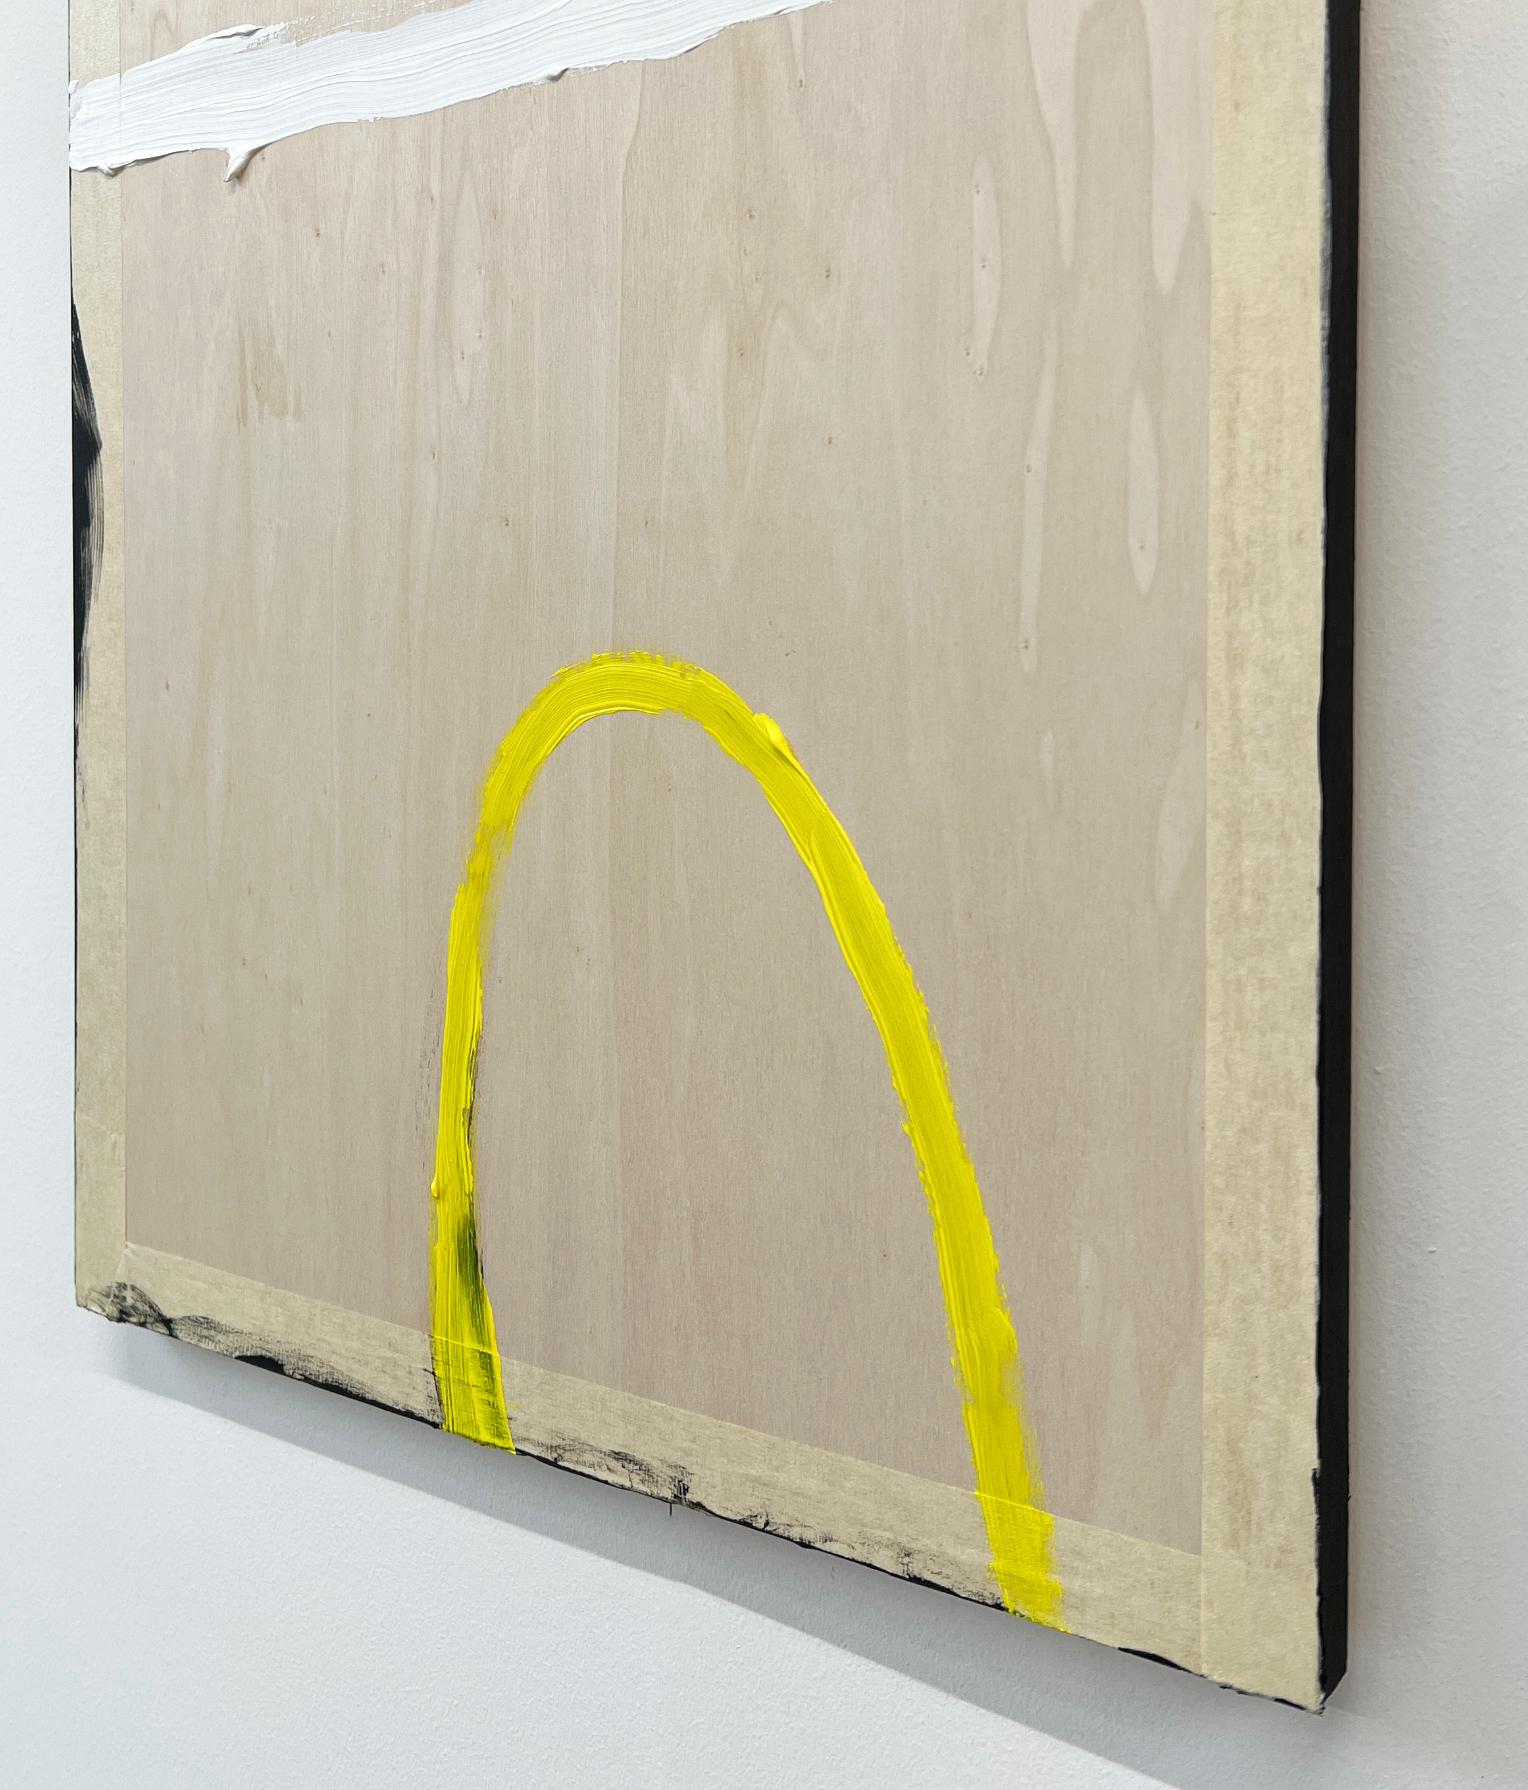 Yellow Arc 2023
by Christian Möller

original abstract painting 
acrylic and tape on wood board panel 

ships securely from London England.

Christian Möller was born in Kabul Afghanistan, a twin, with German and Anglo Indian parents.
His works tend